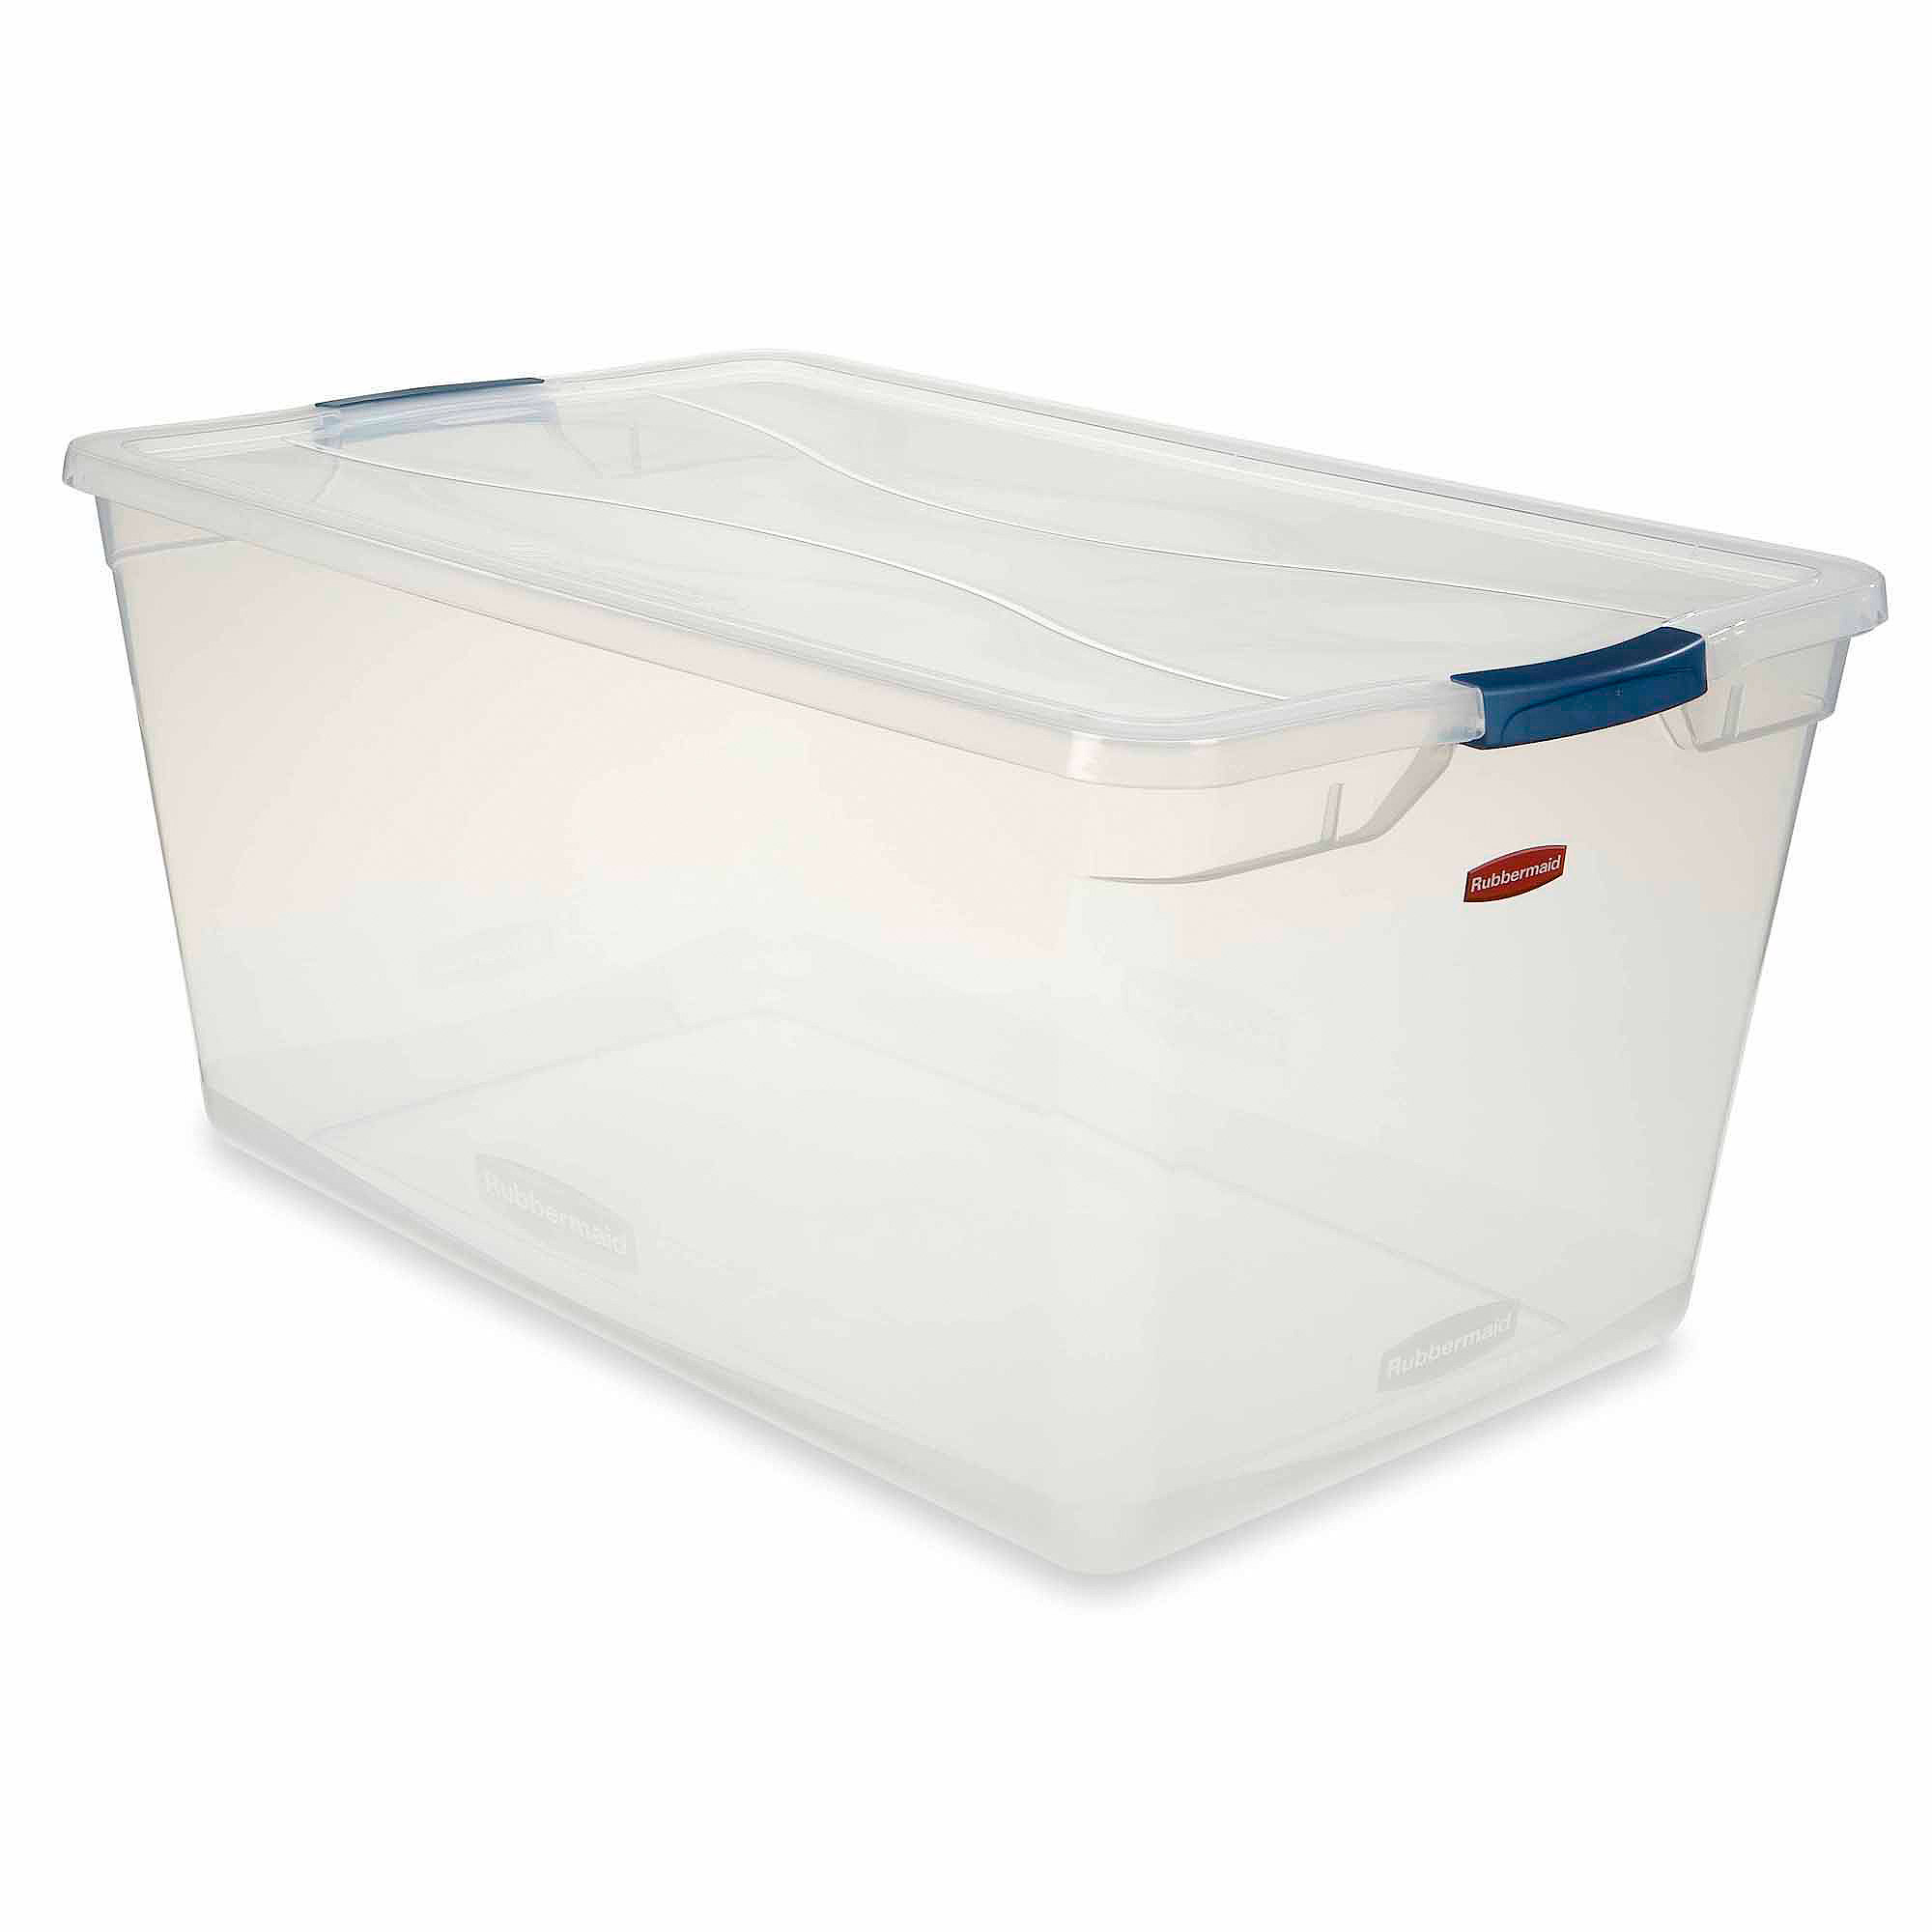 Rubbermaid Clever Store Clears Standard Latch Storage Container, 95 qt, Clear - image 1 of 2